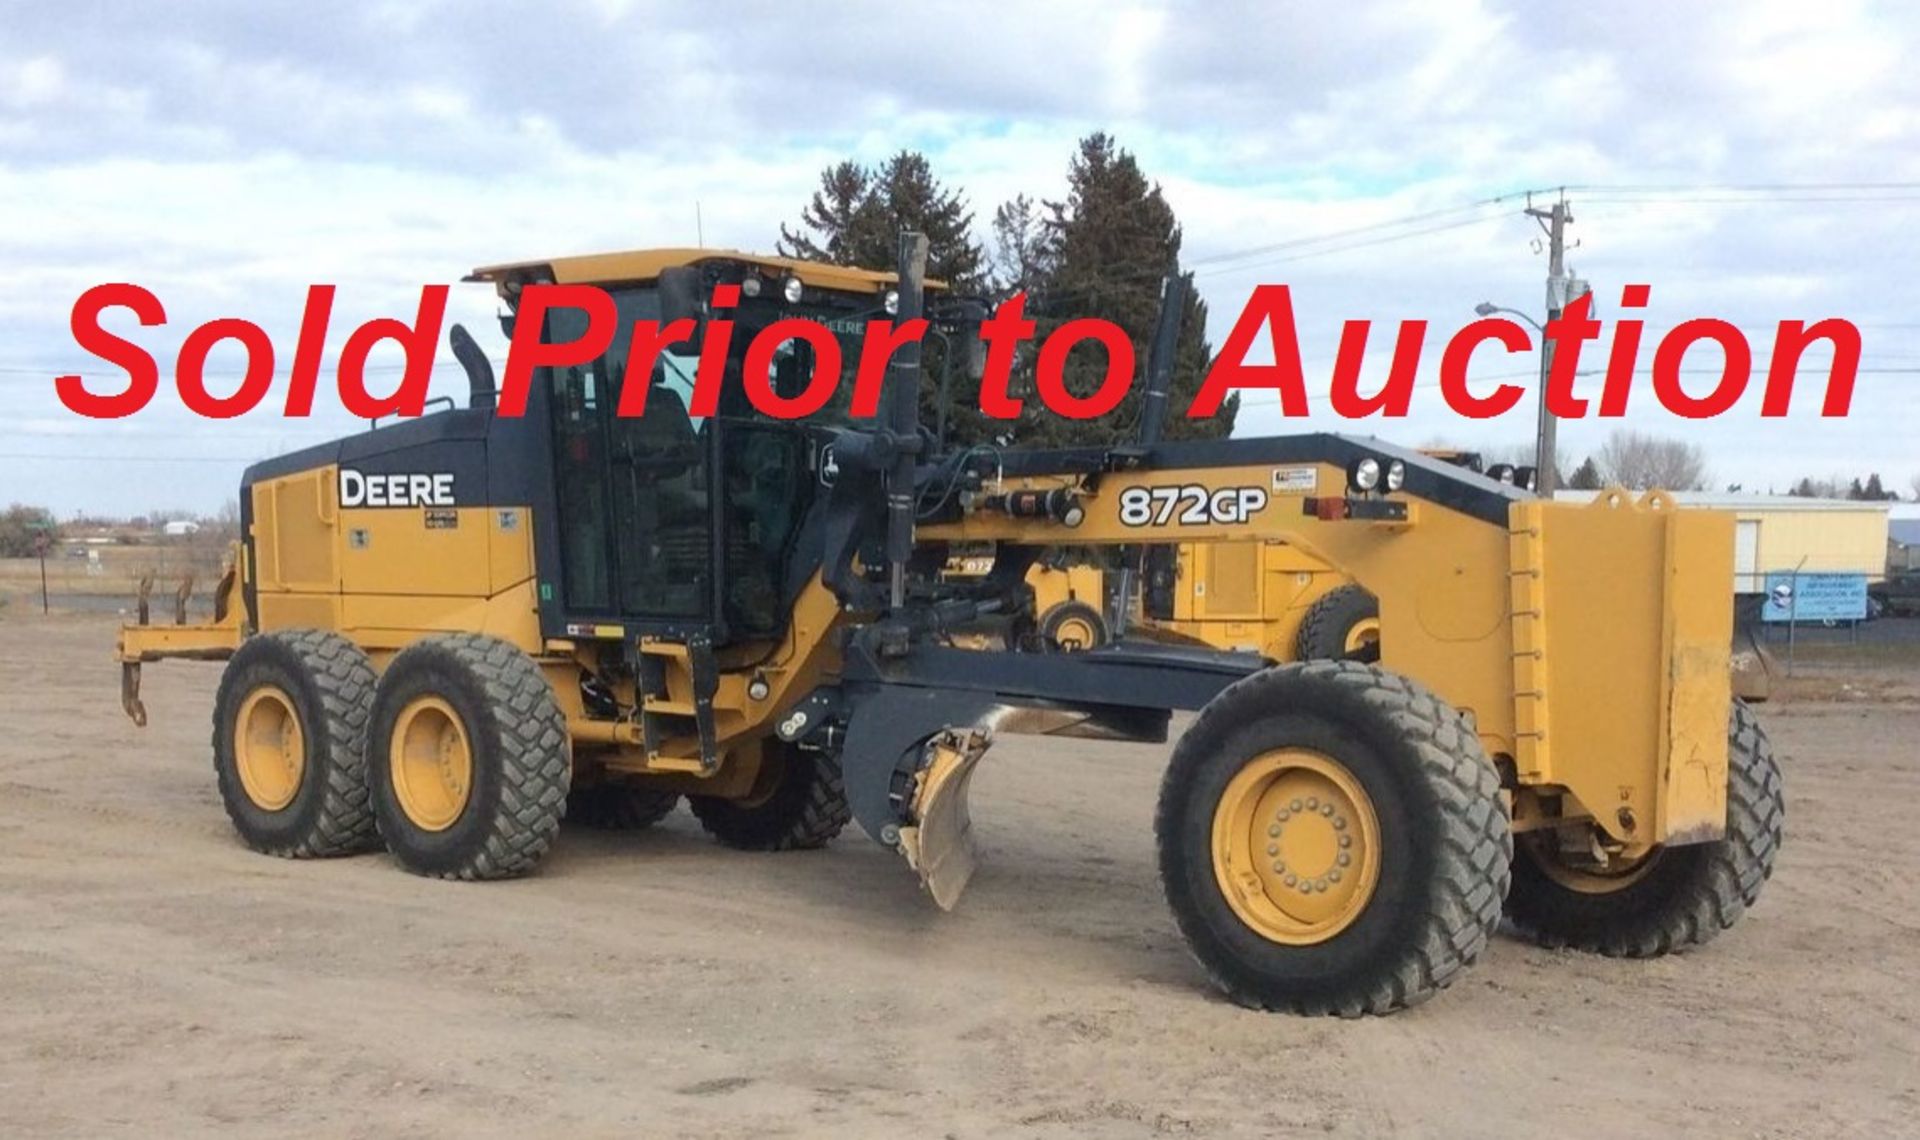 SOLD Prior to Auction -- NO LONGER AVAILABLE FOR SALE -- John Deere Grader, Year 2013, Model: 872GP